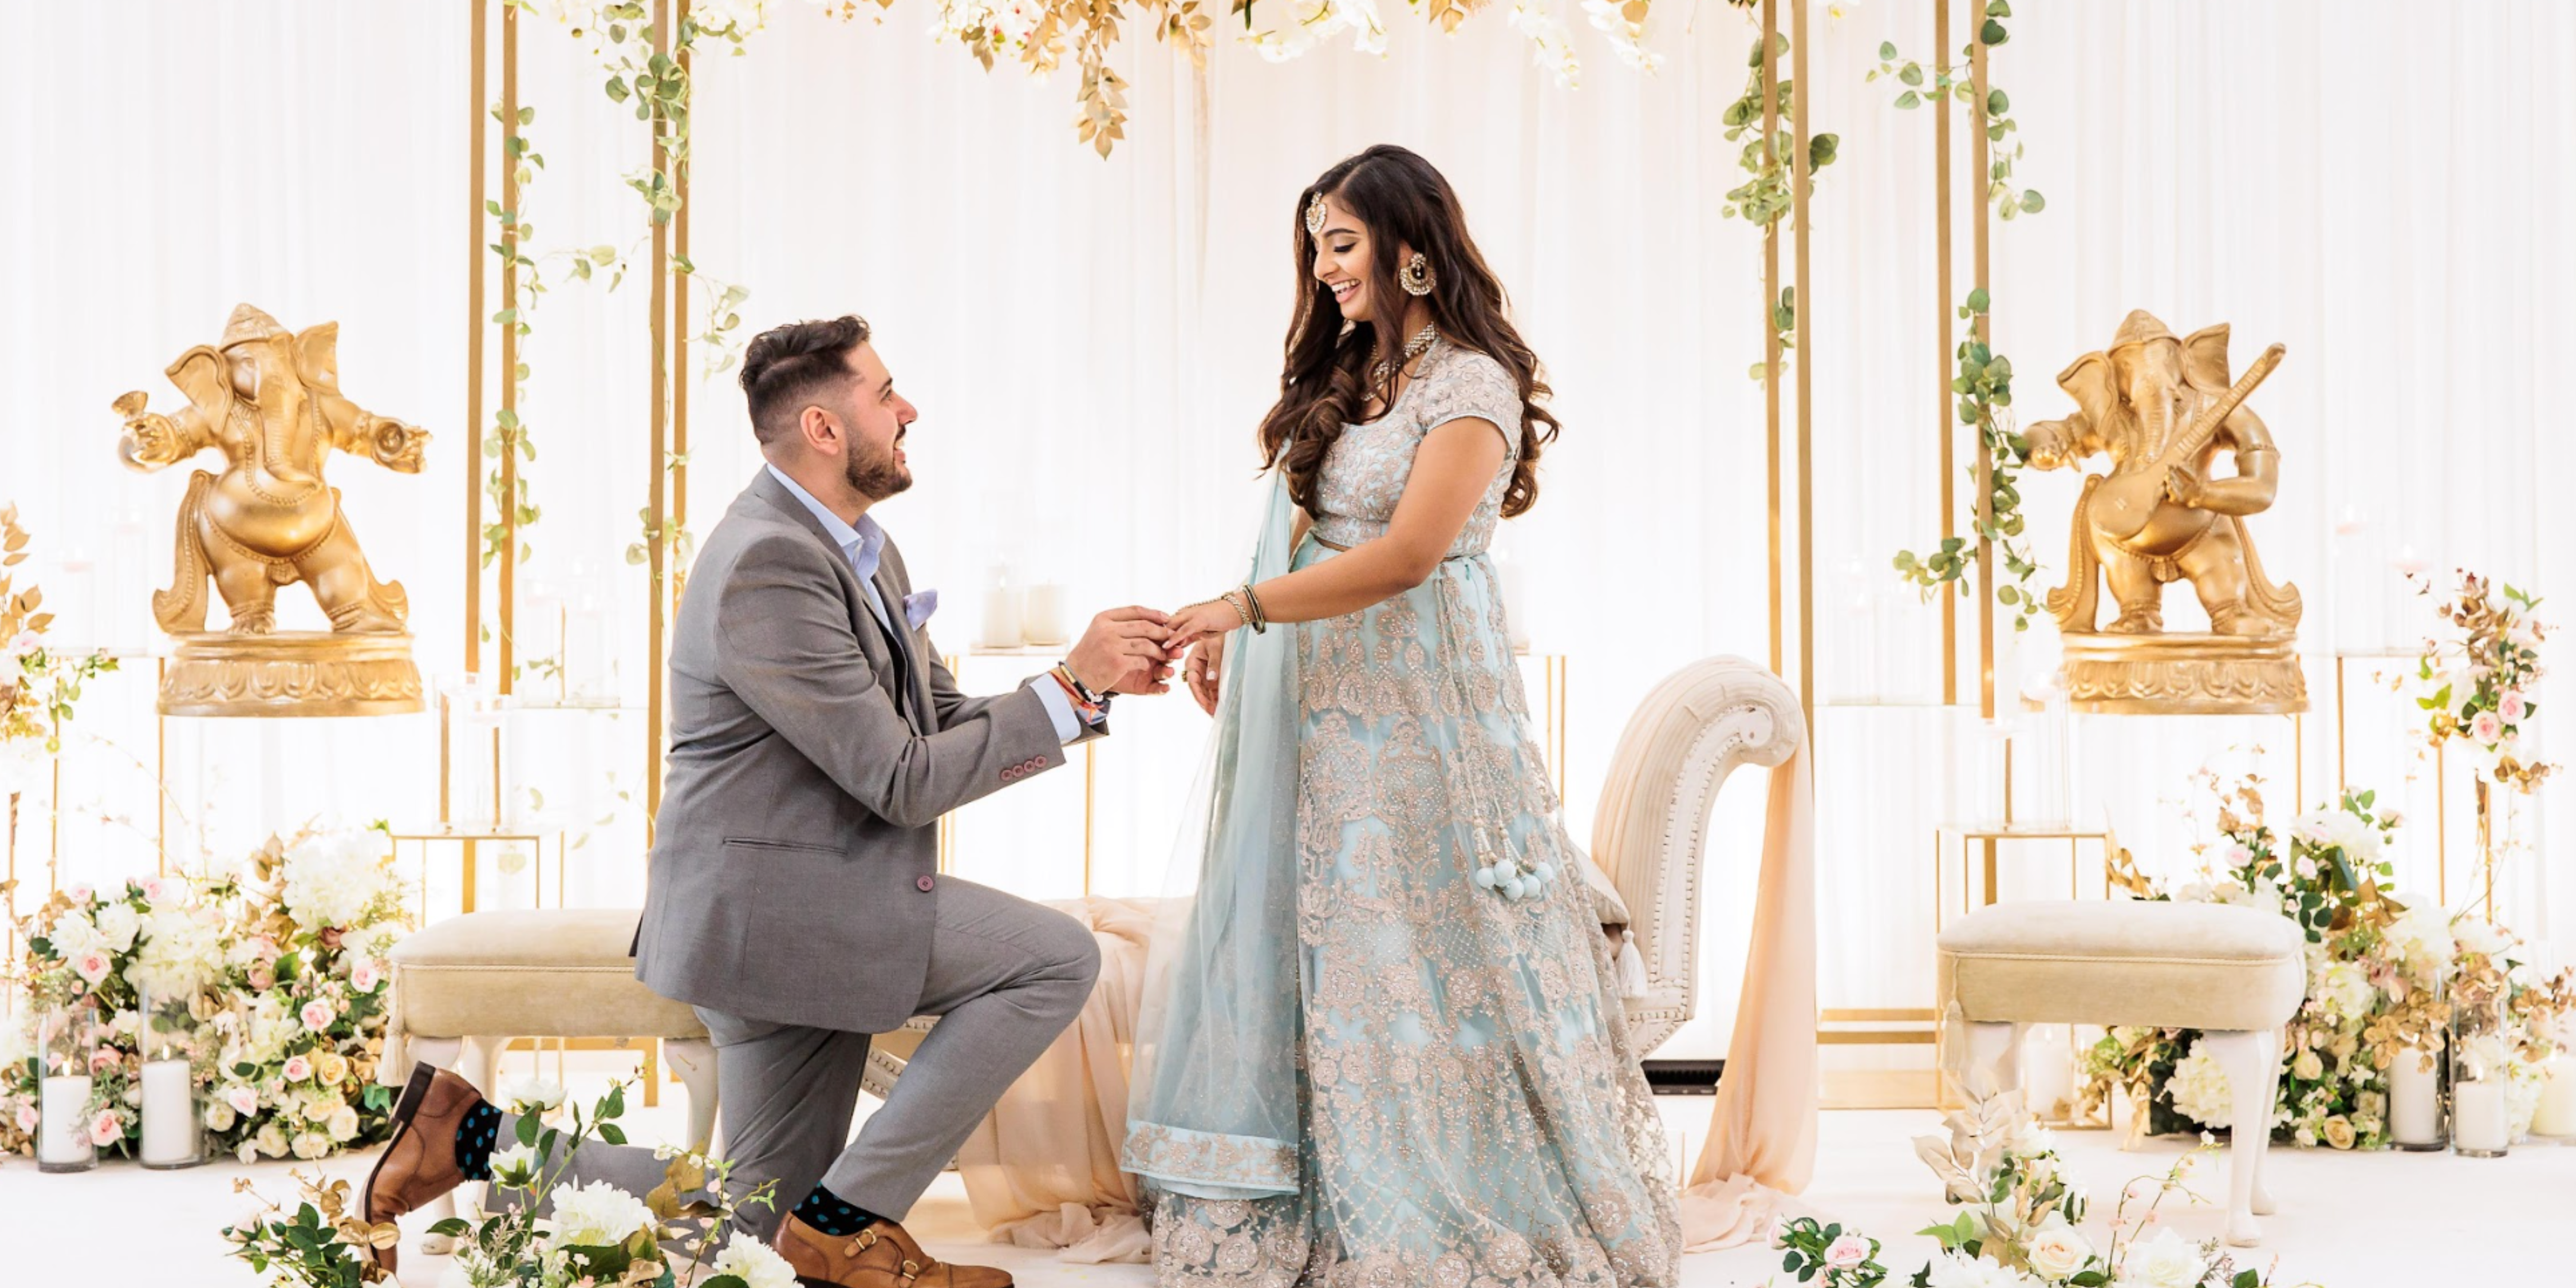 From Dil Mil To Down The Aisle: Angeli & Sanjay’s Real Wedding